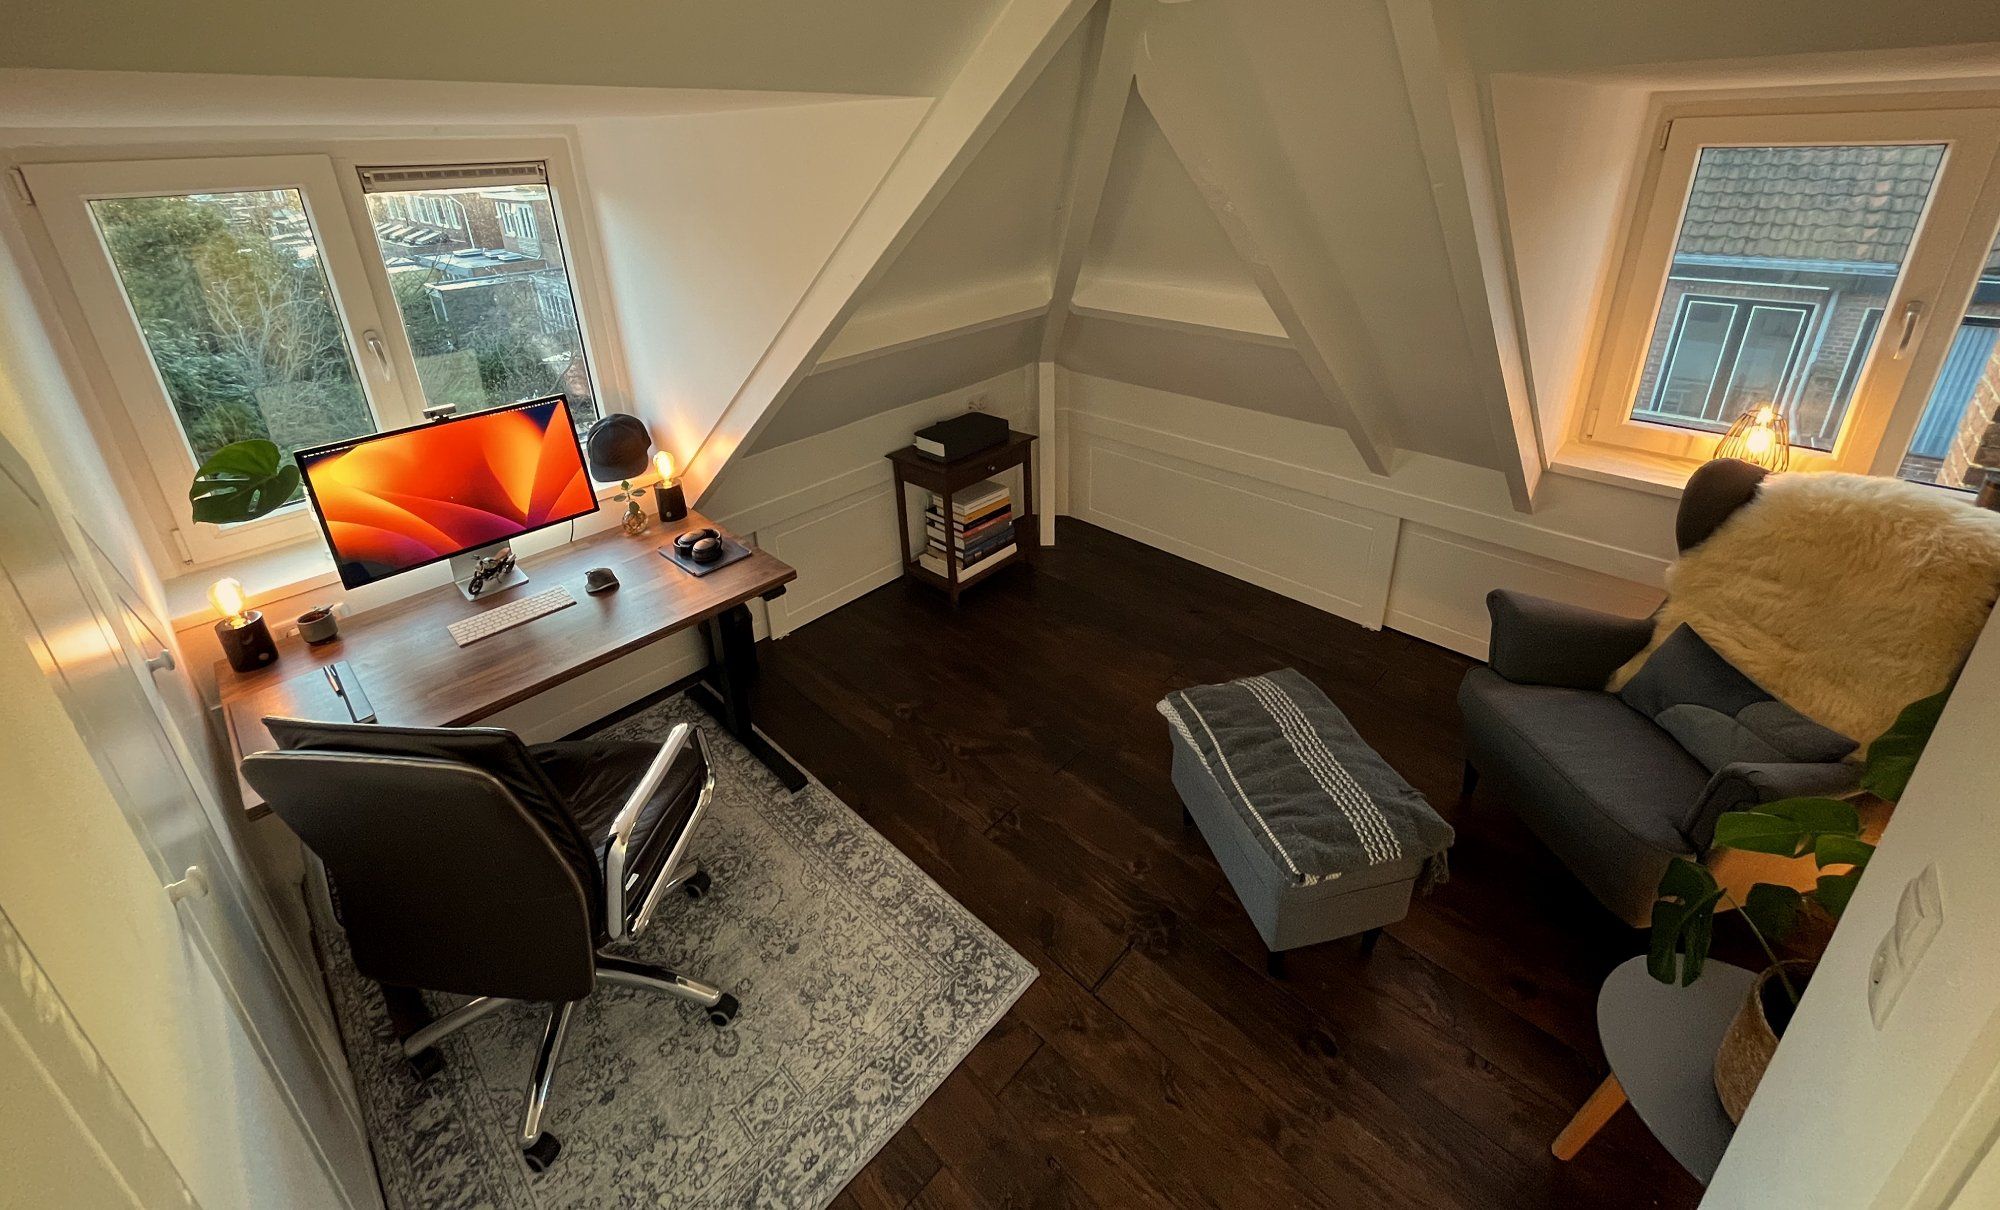 A cosy home workspace with two windows in the attic